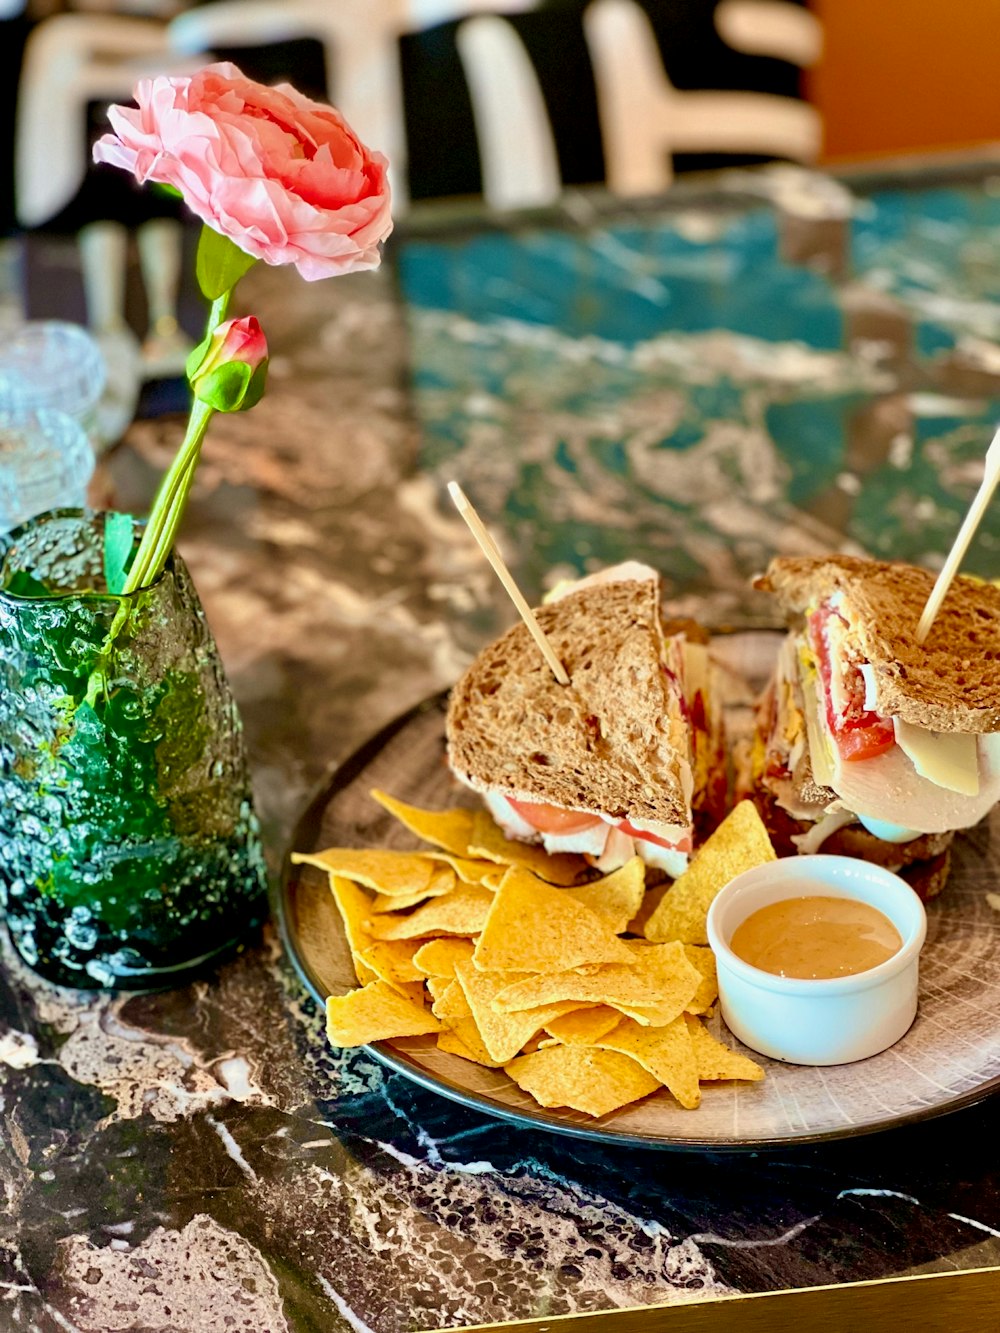 a plate with a sandwich and chips on a table